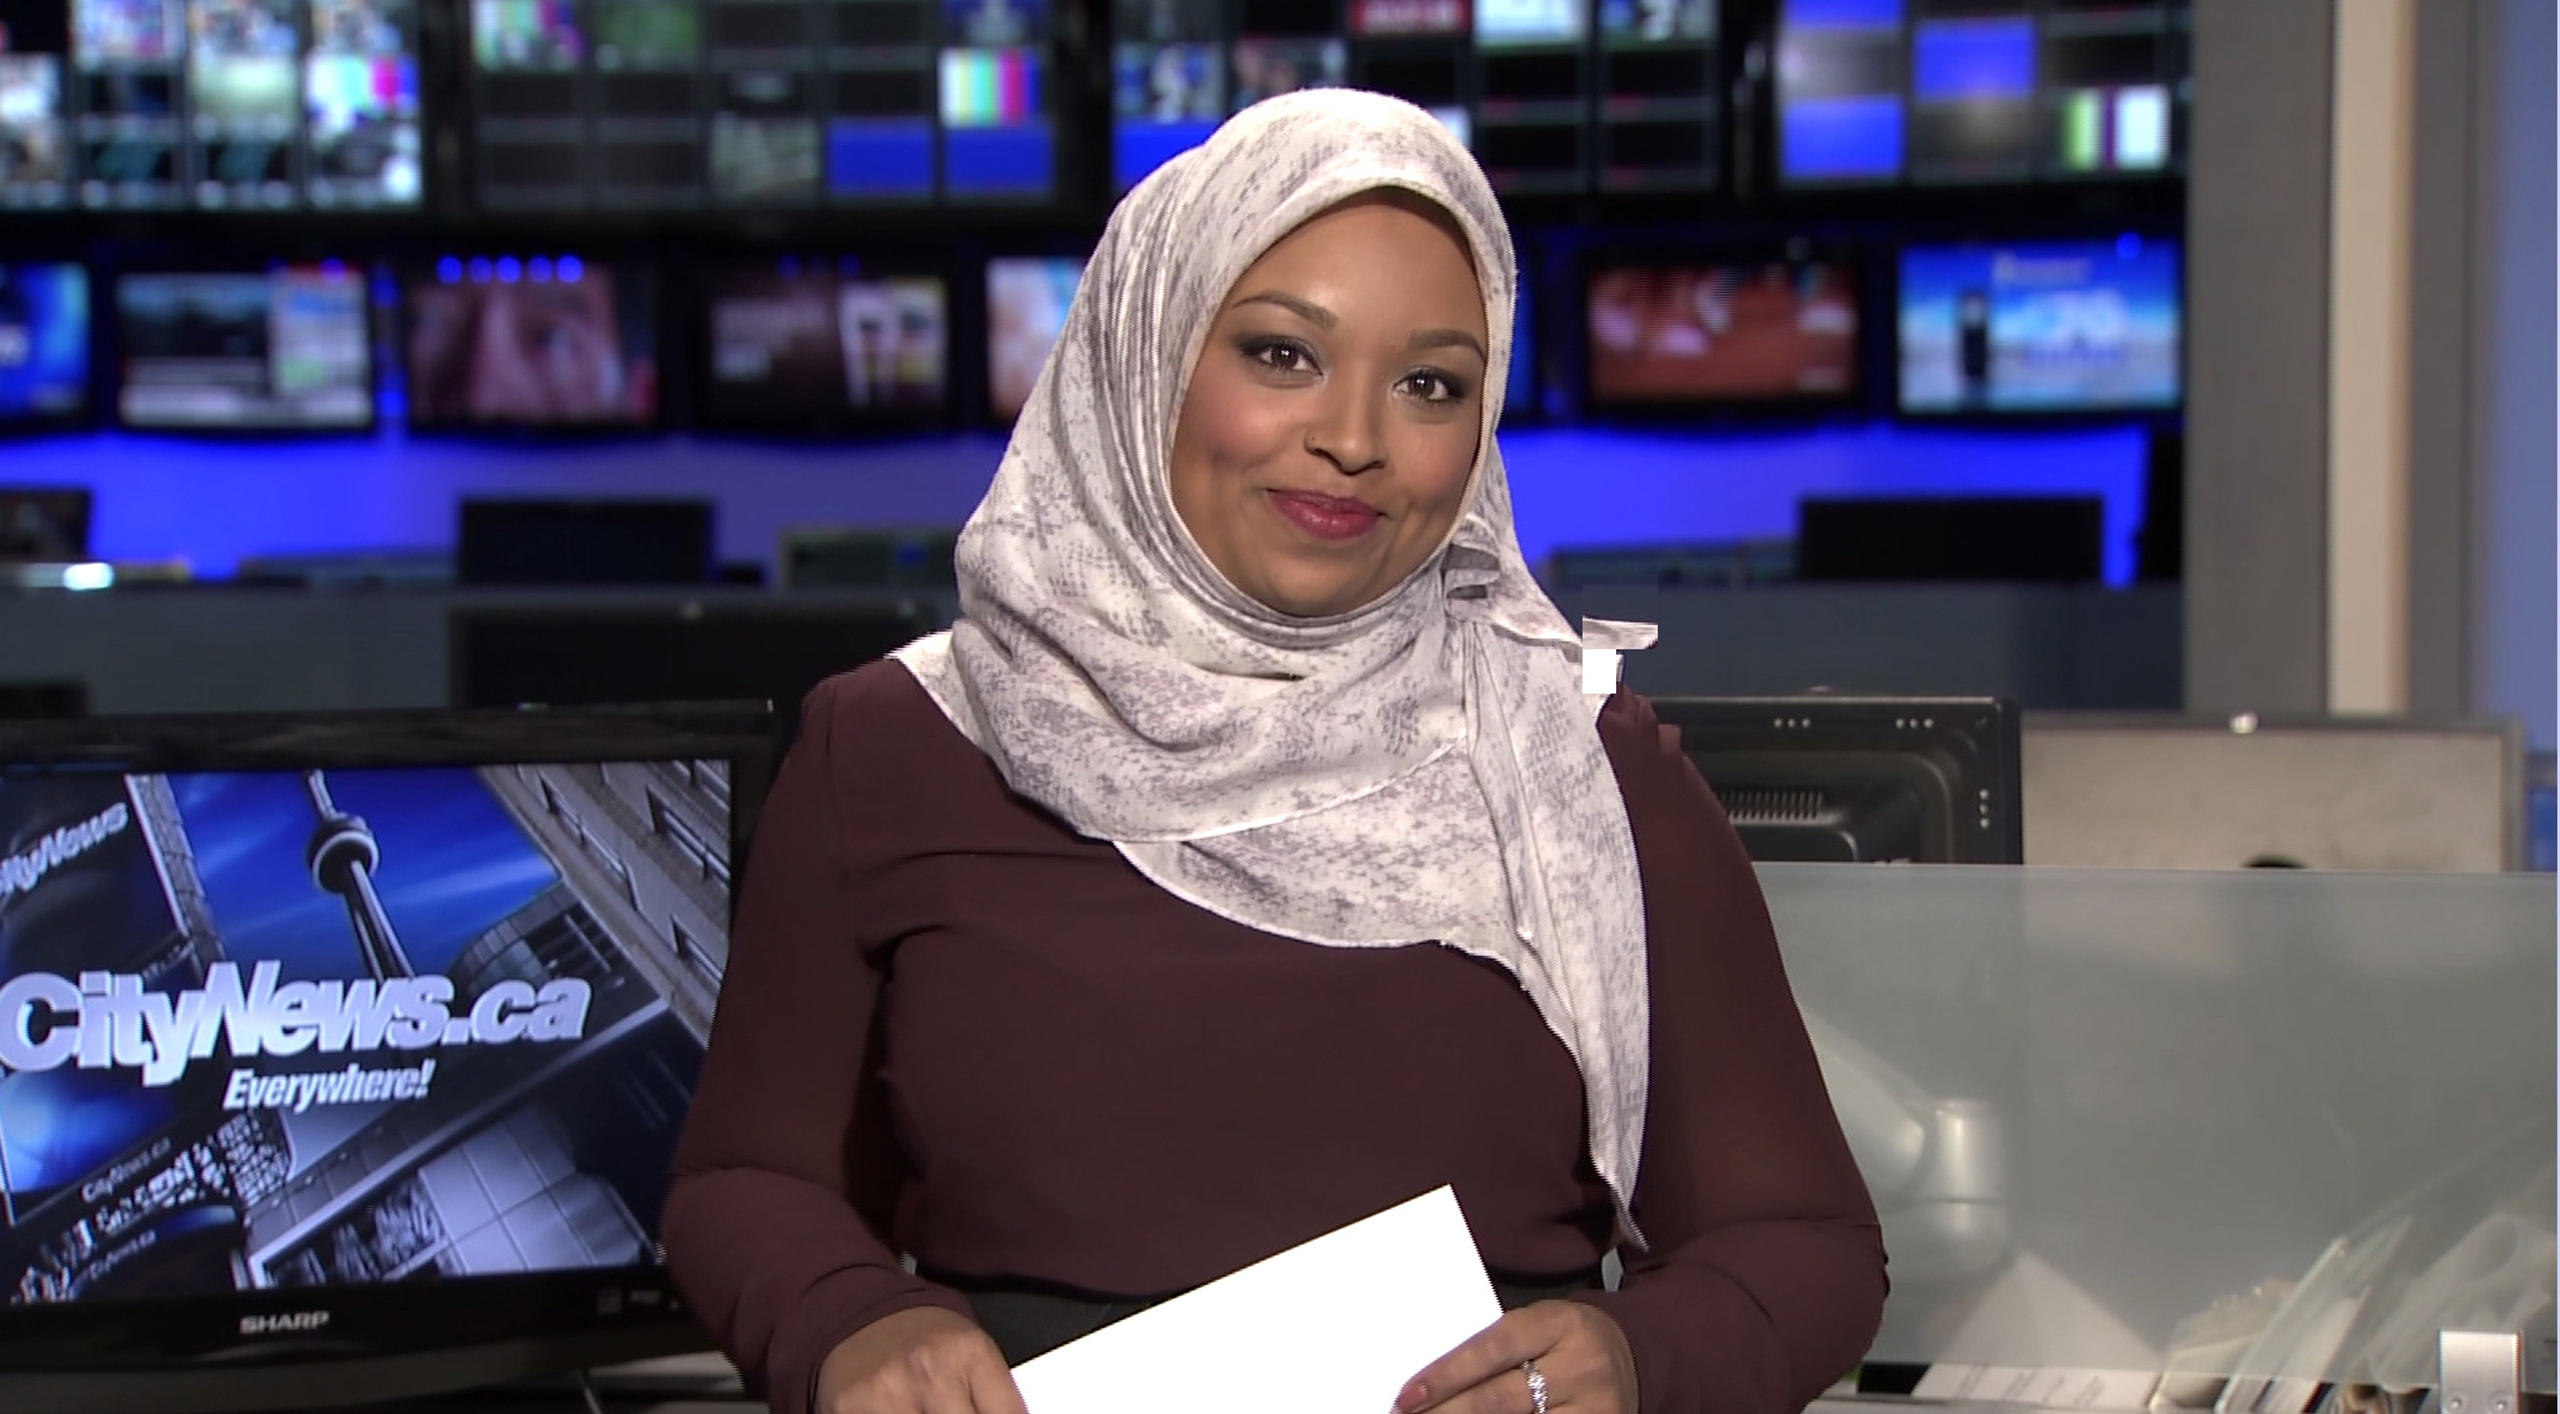 Massa, 29, said that she became Canada's first hijab-wearing television news reporter in 2015 while reporting for CTV News in Kitchener, Ontario, a city west of Toronto. She moved back to Toronto, where she grew up, earlier this year to take a reporting job at CityNews. (CityNews—AP)